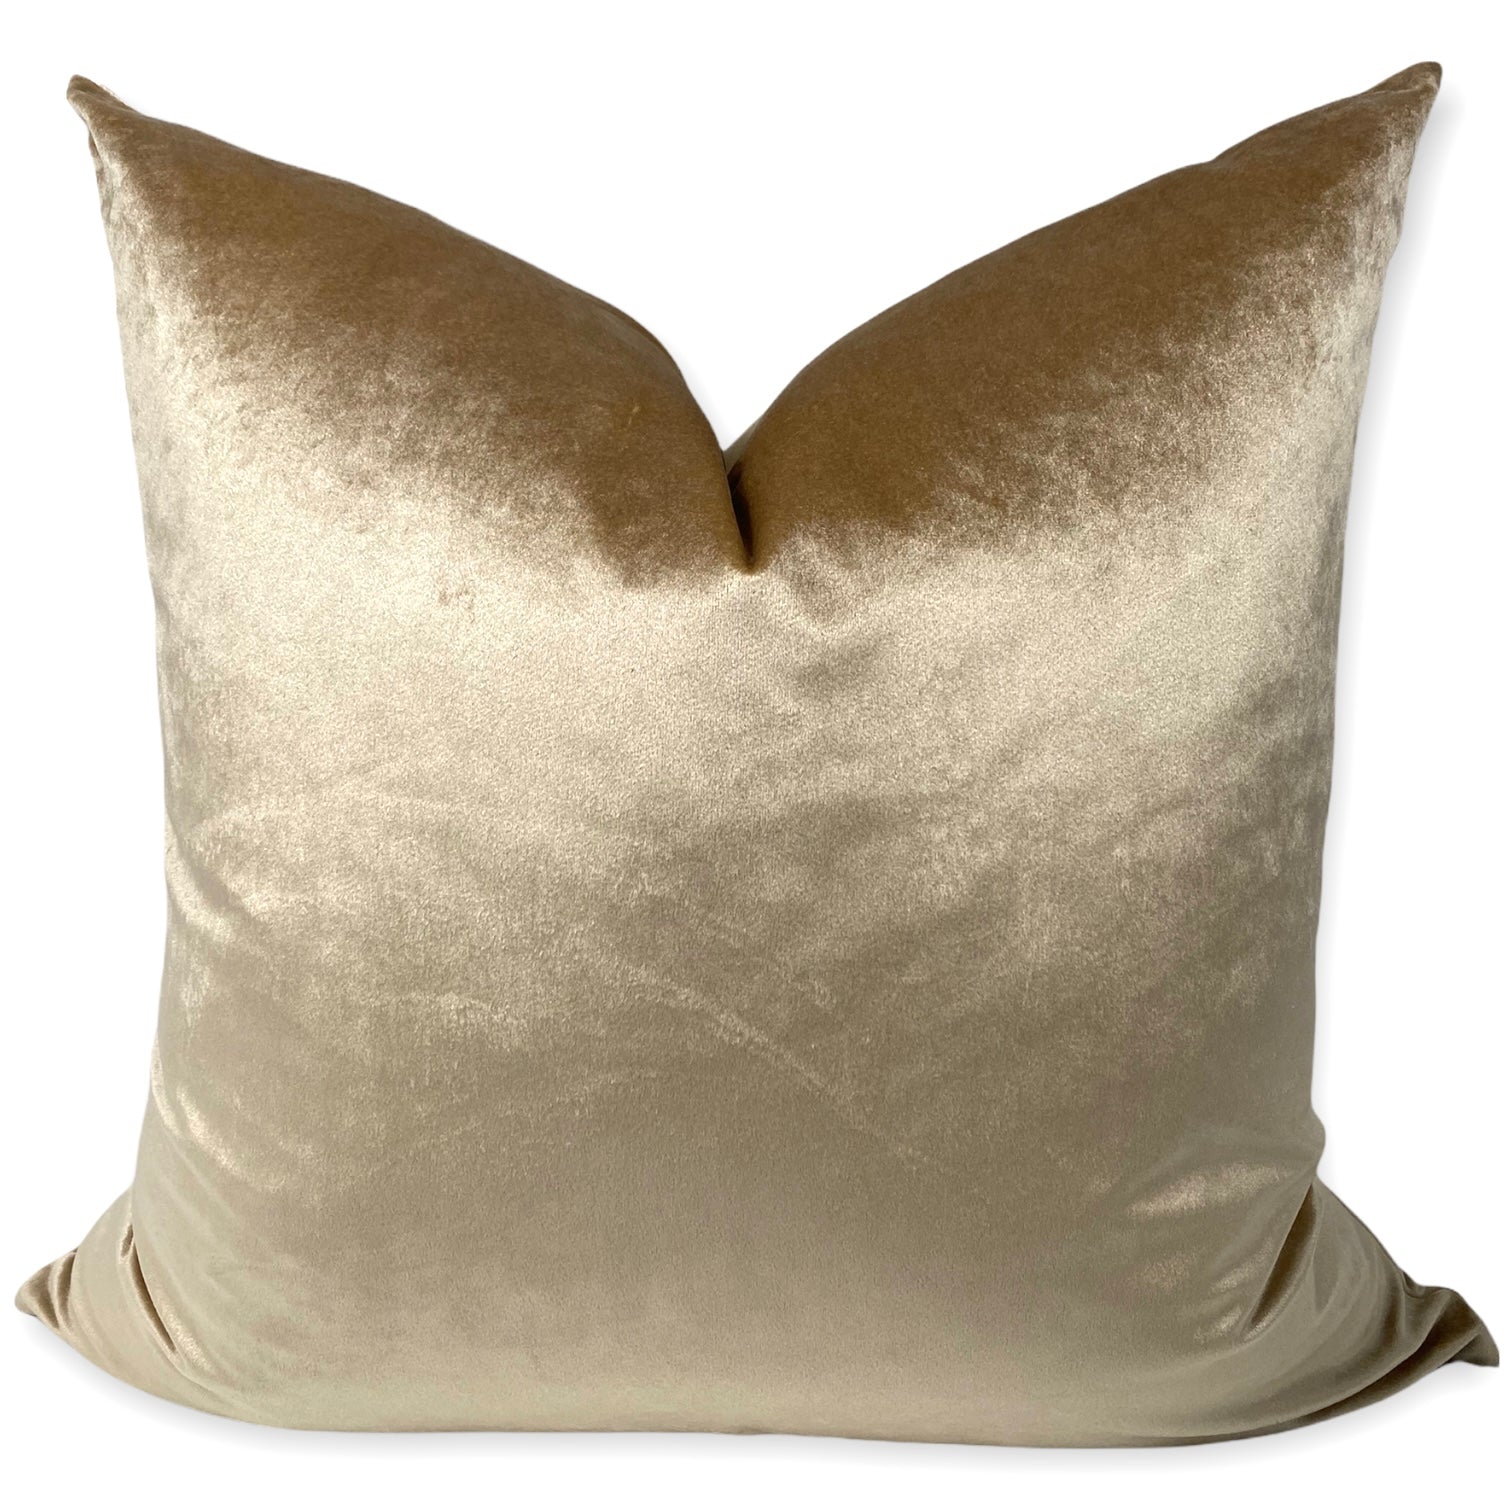 Chateau Chanel French Message Ivory Pillow With Removable Silver FleurdiLis  Pin - Mediterranean - Decorative Pillows - by Evelyn Hope Collection